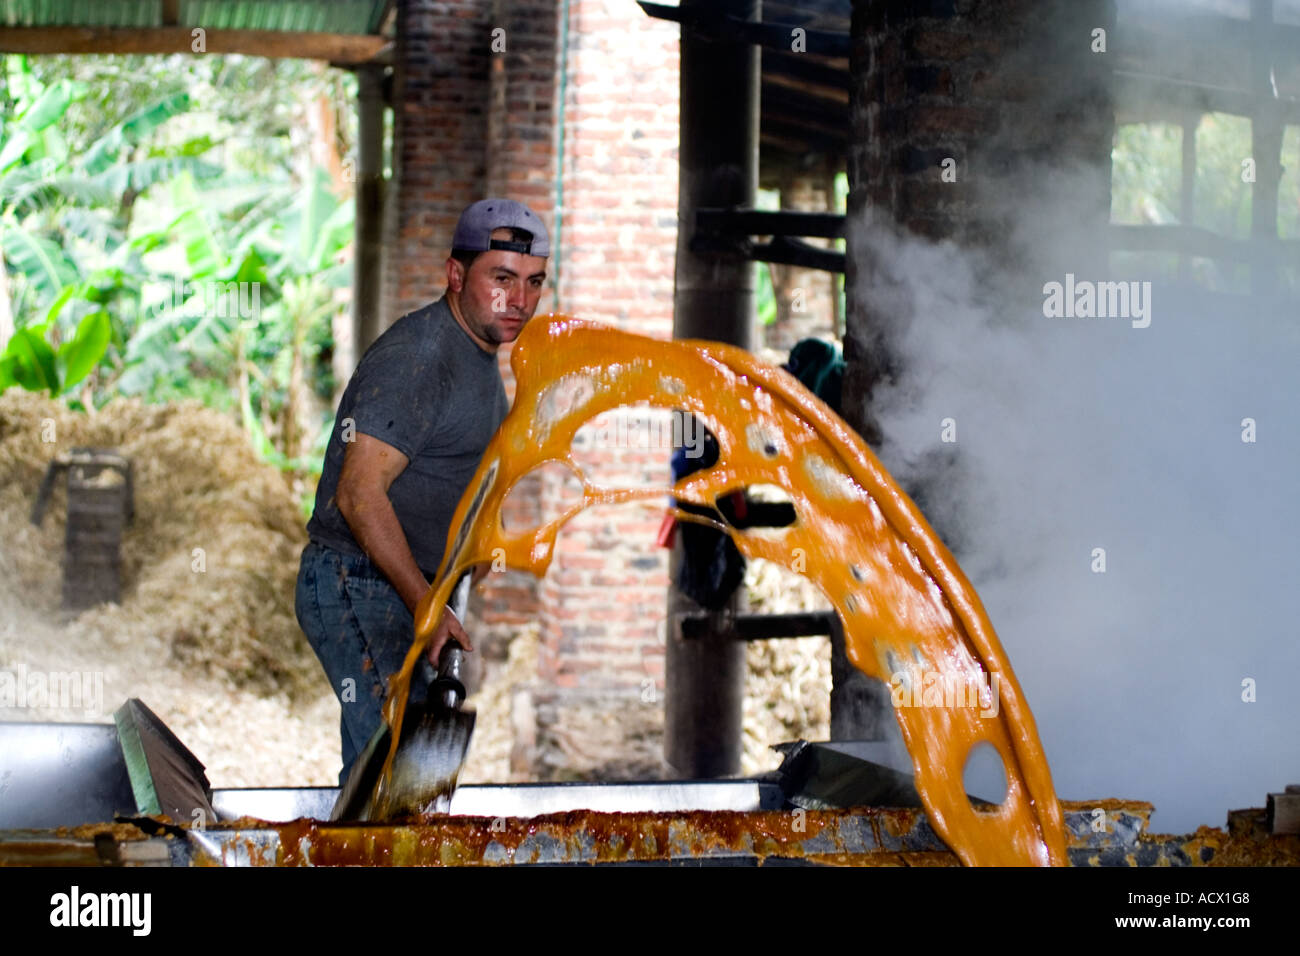 The sugar handcrafted production in Colombia, San José, Boyacá, Colombia, South America Stock Photo